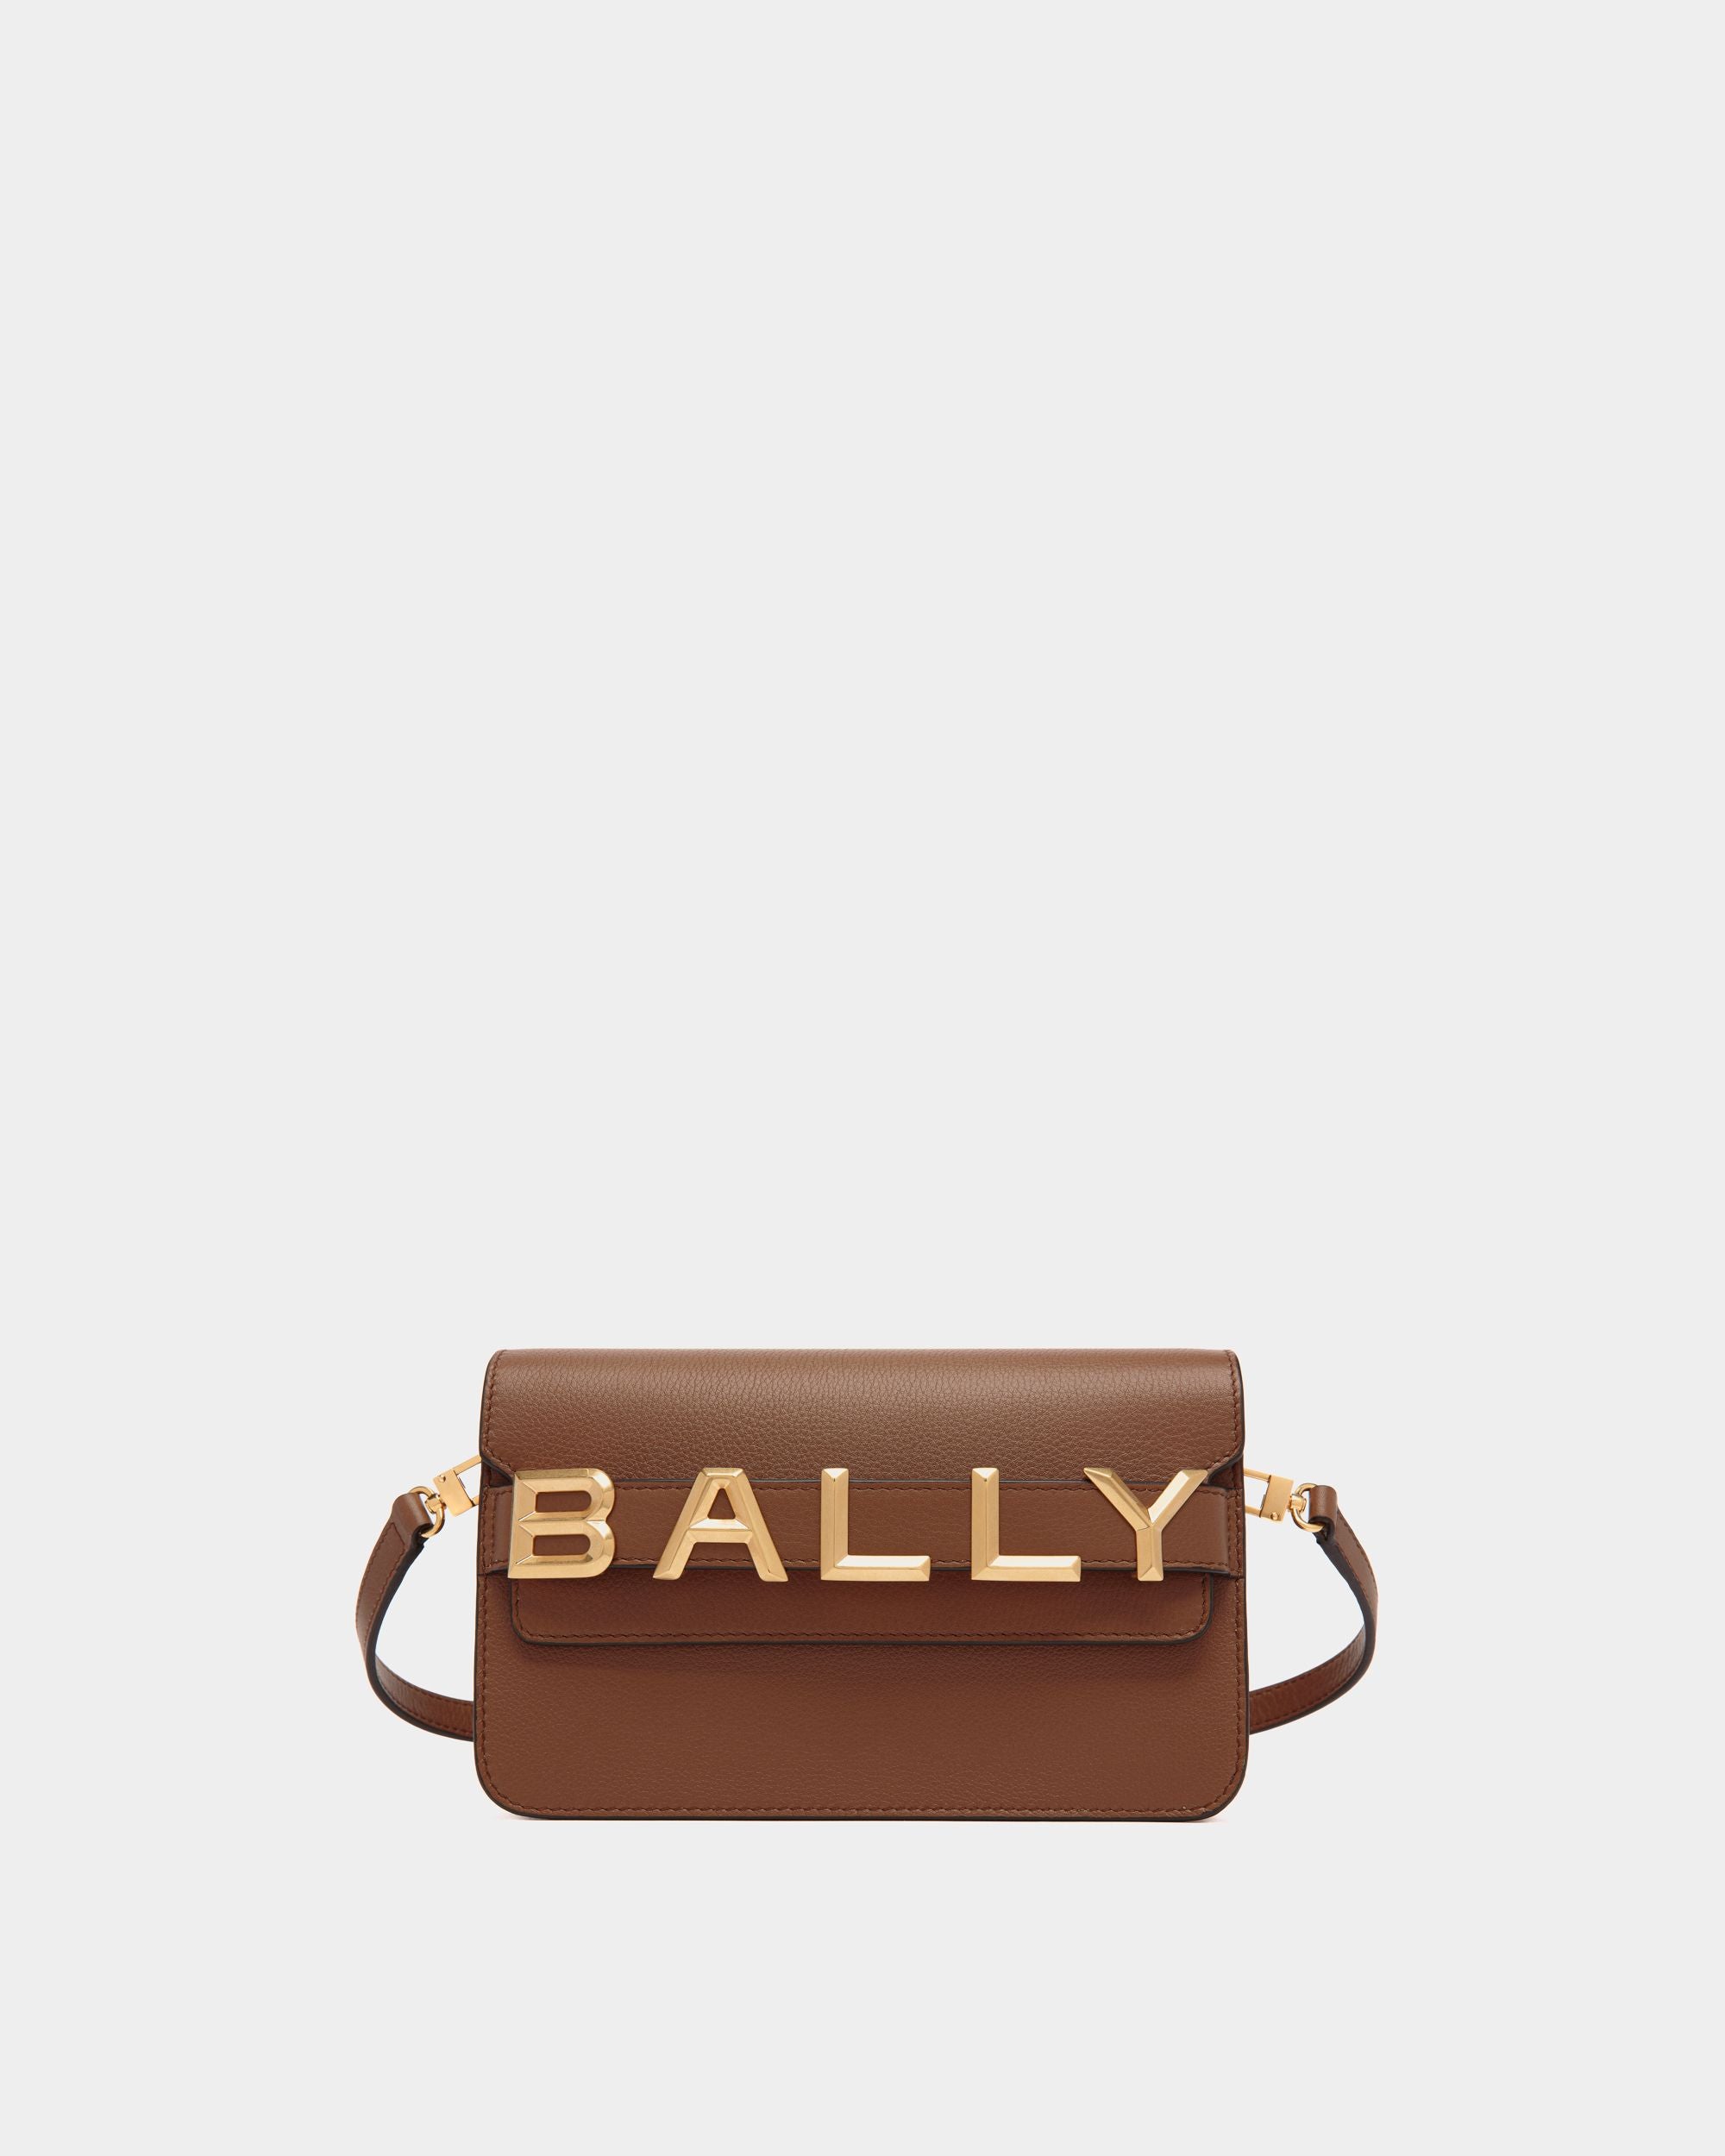 Bally Spell | Women's Crossbody Bag in Brown Suede | Bally | Still Life Front